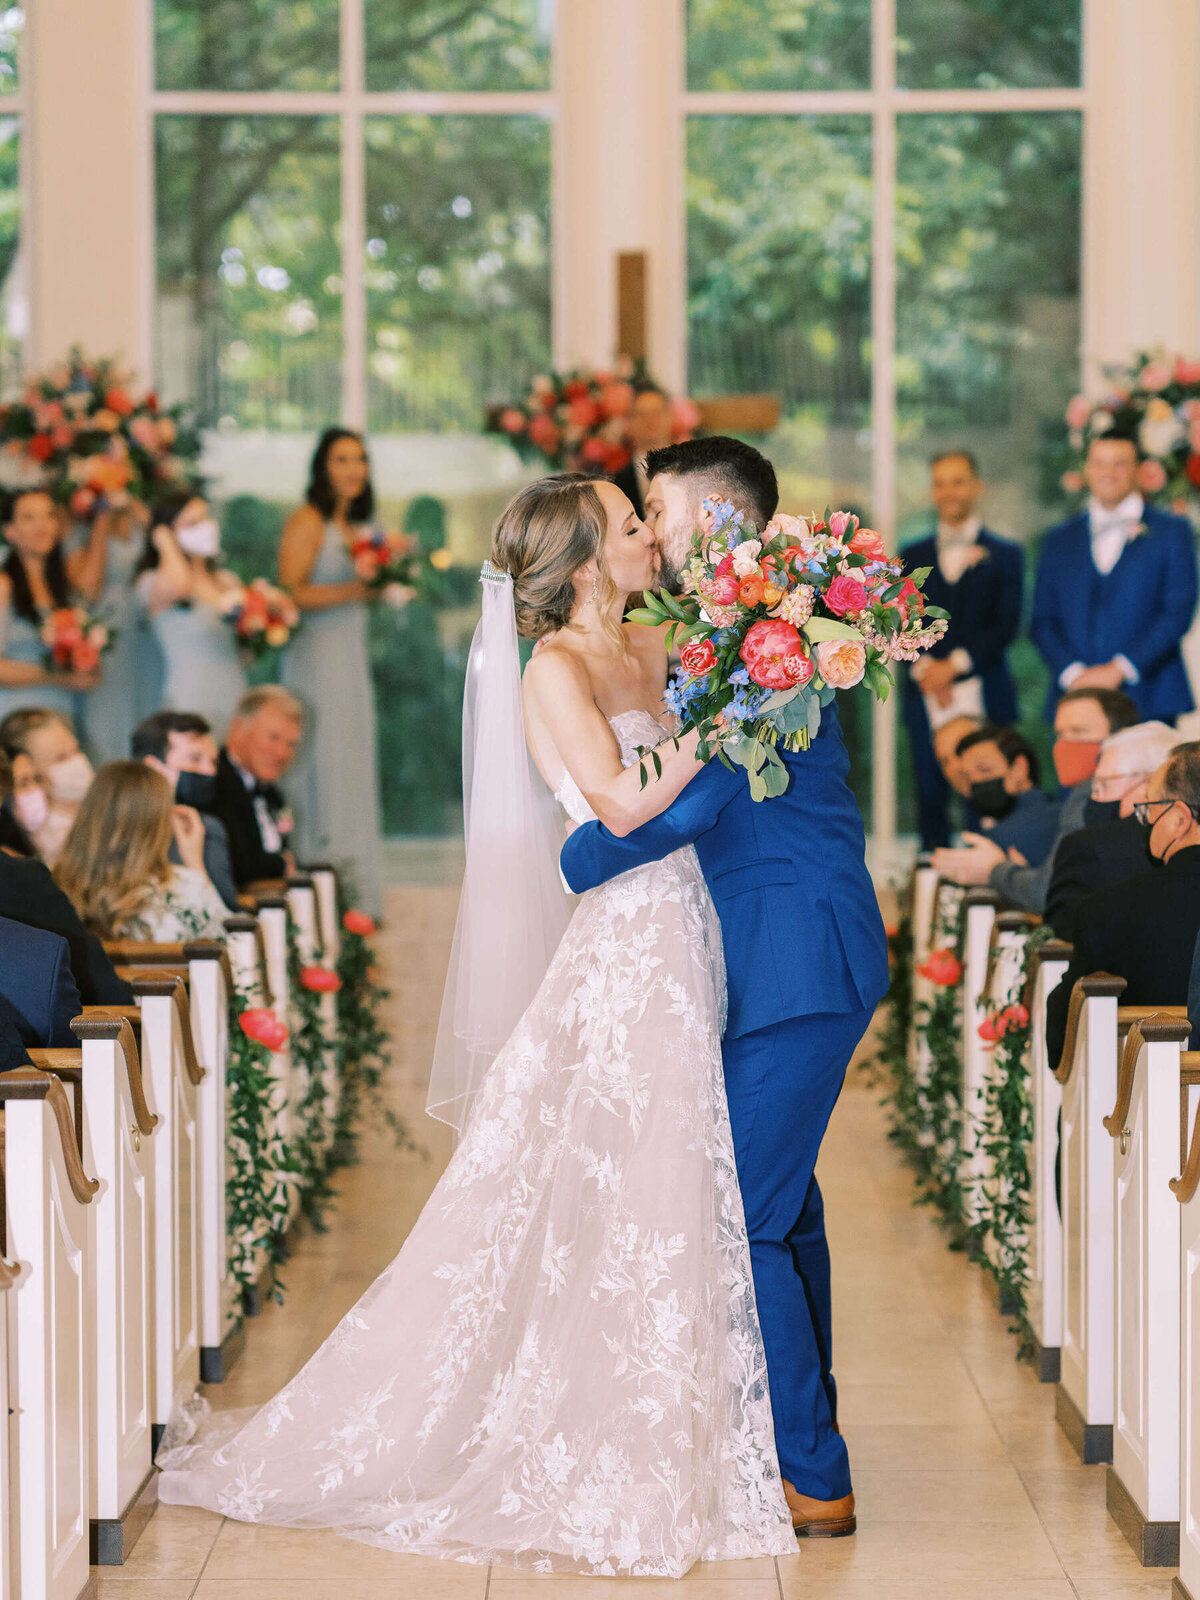 Bride and groom kiss in wedding chapel aisle with colorful bridal bouquet